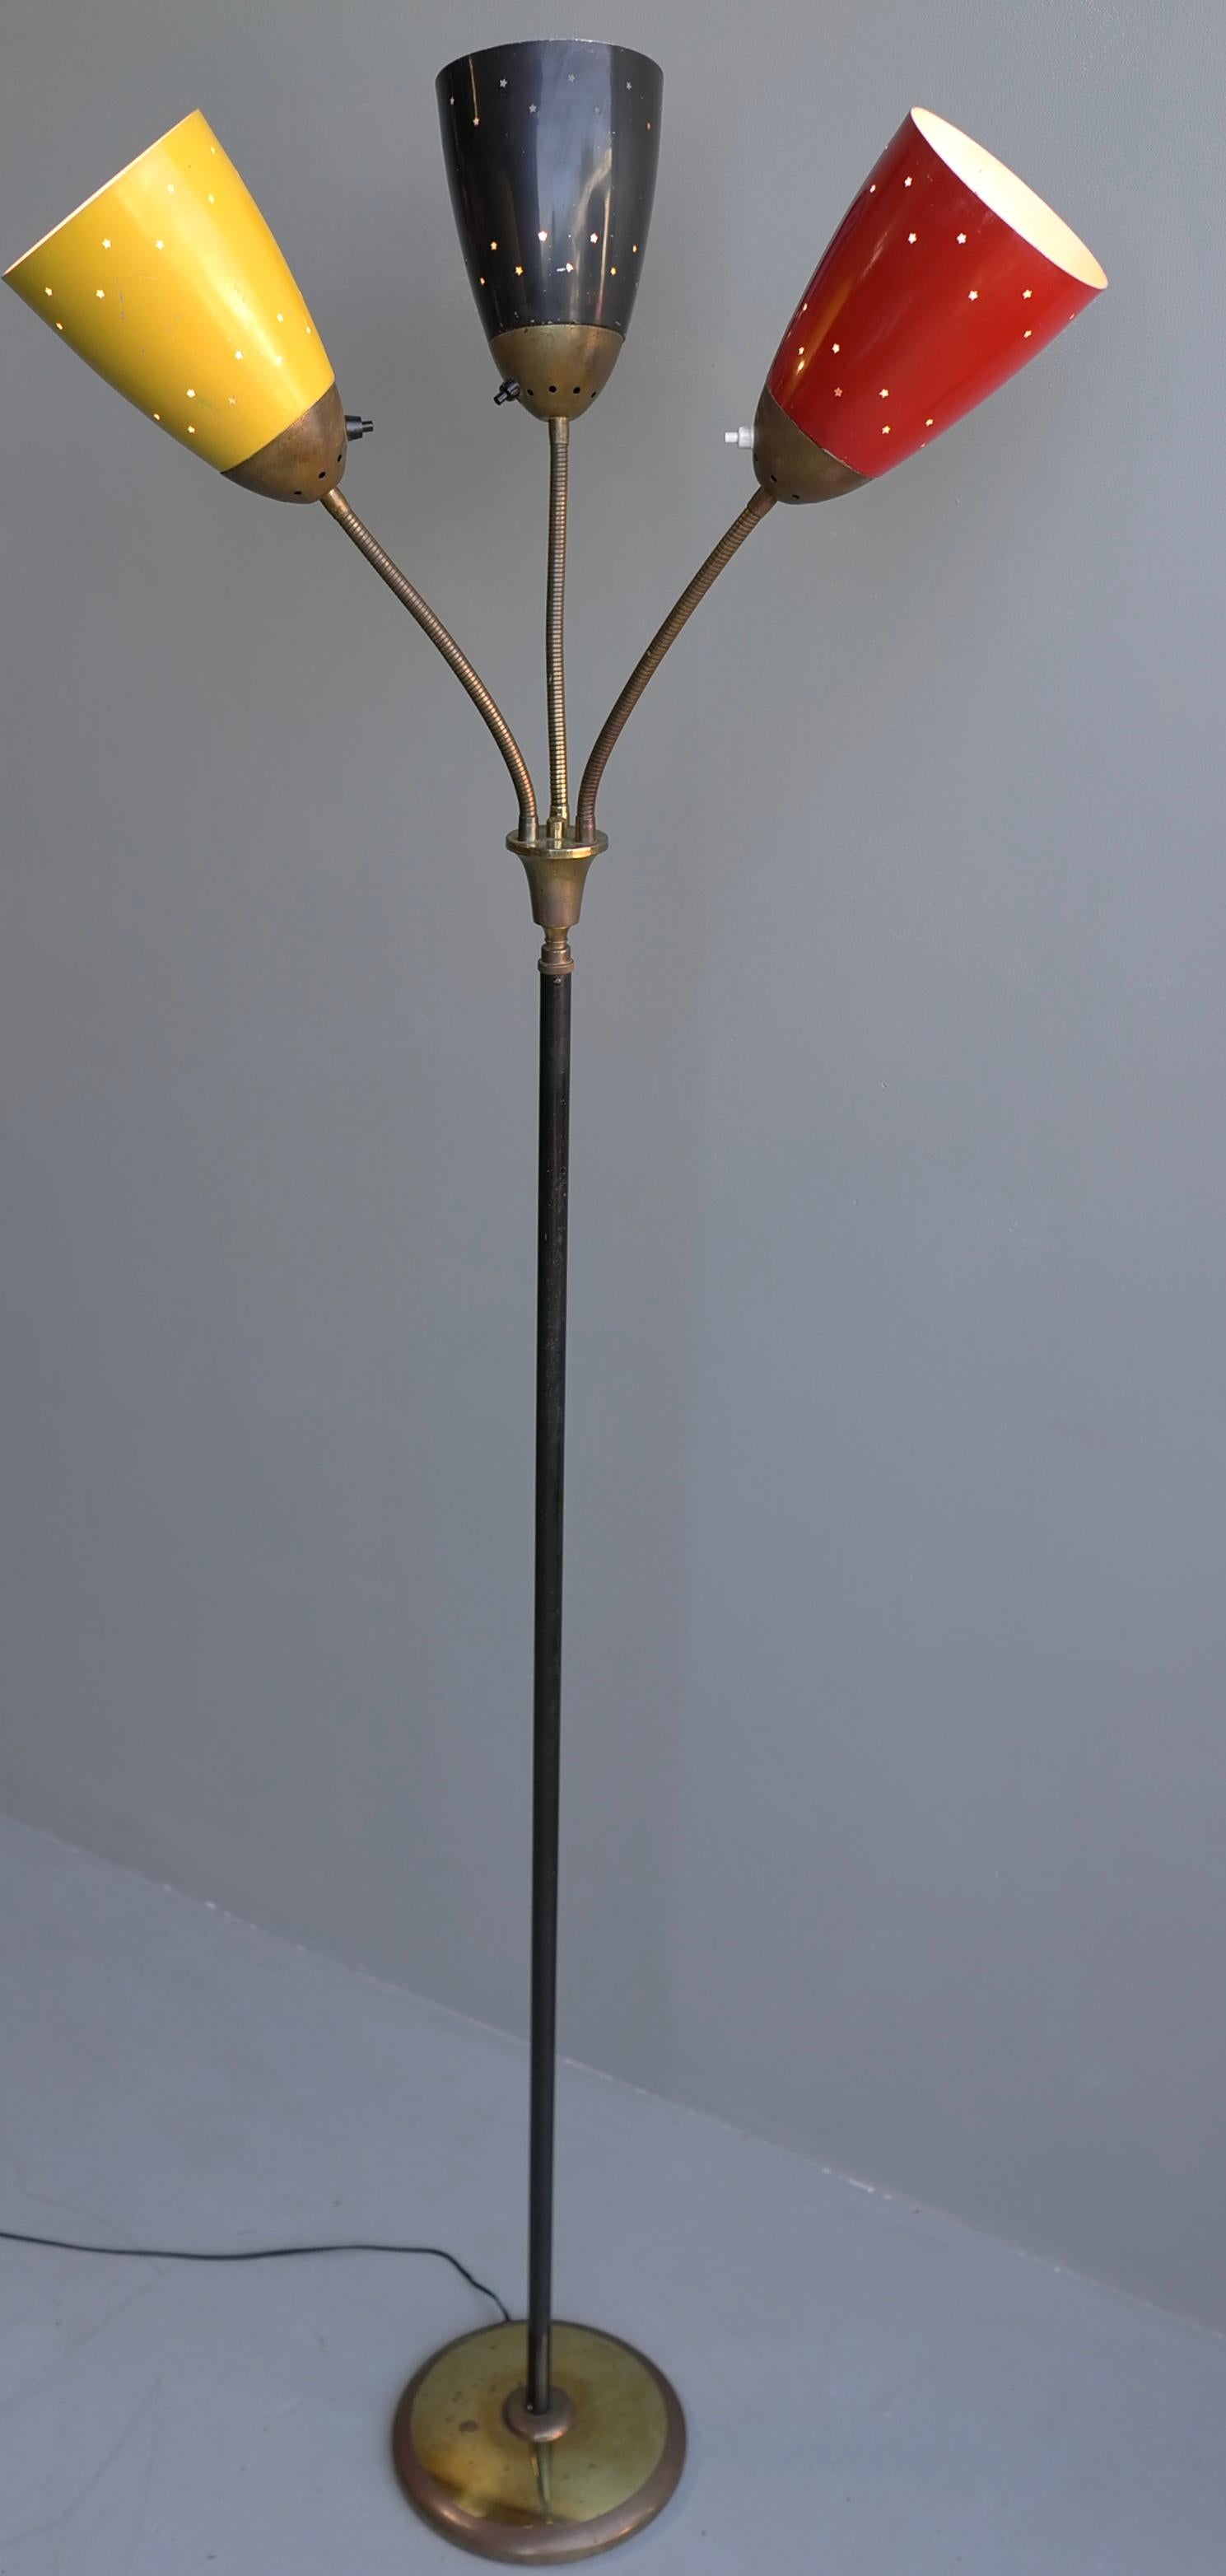 Adjustable floor lamp with three colored shades, Italy, 1950s. Most probably manufactured by Stilnovo or Stilux.